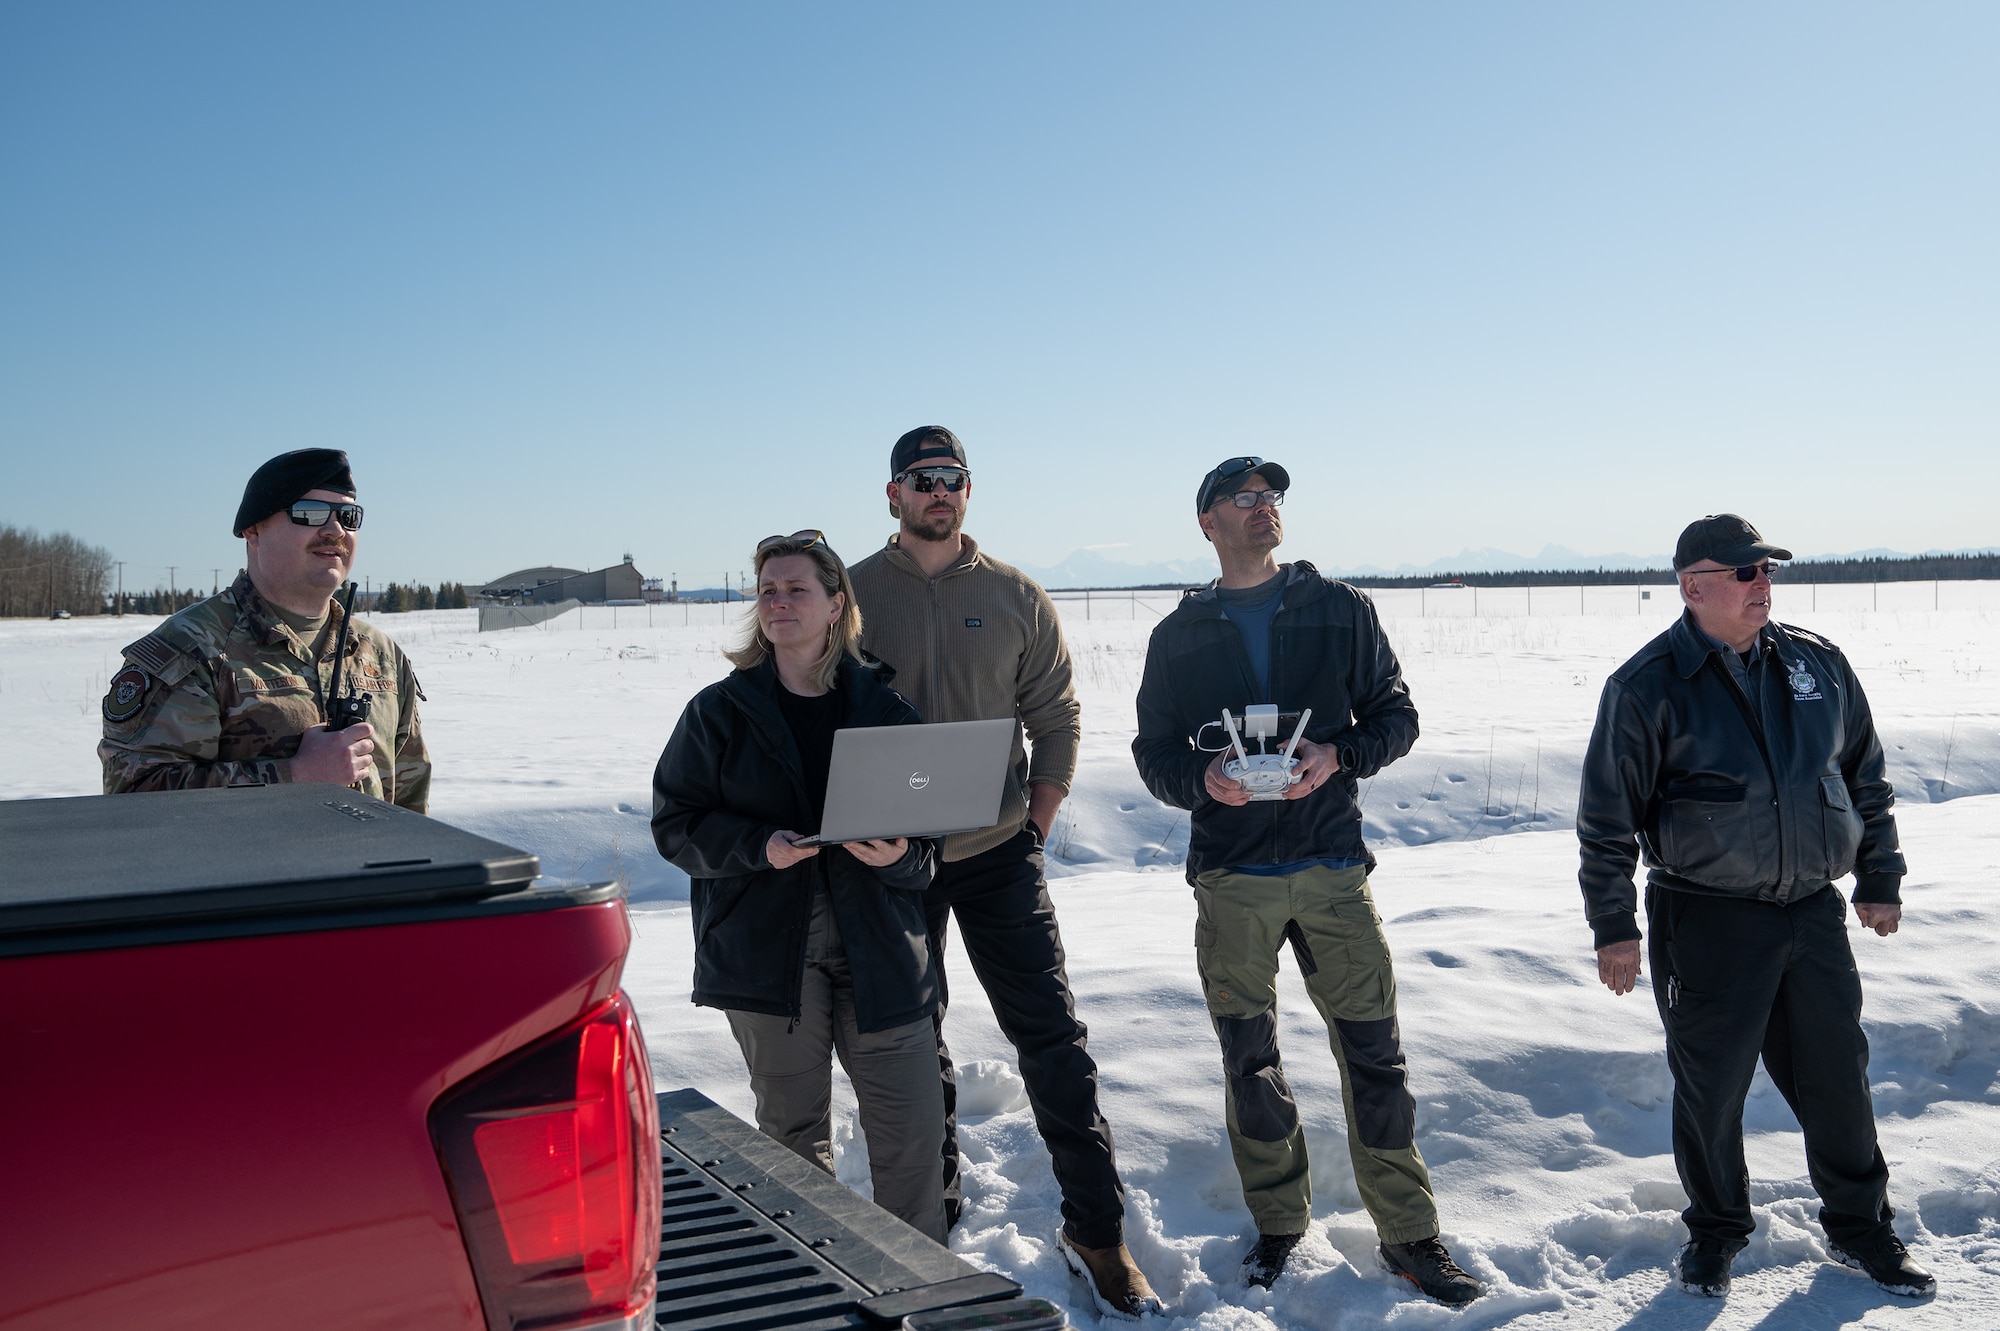 Team members from the 354th Security Forces Squadron and Andural contracting team stand together and watch the drone test.